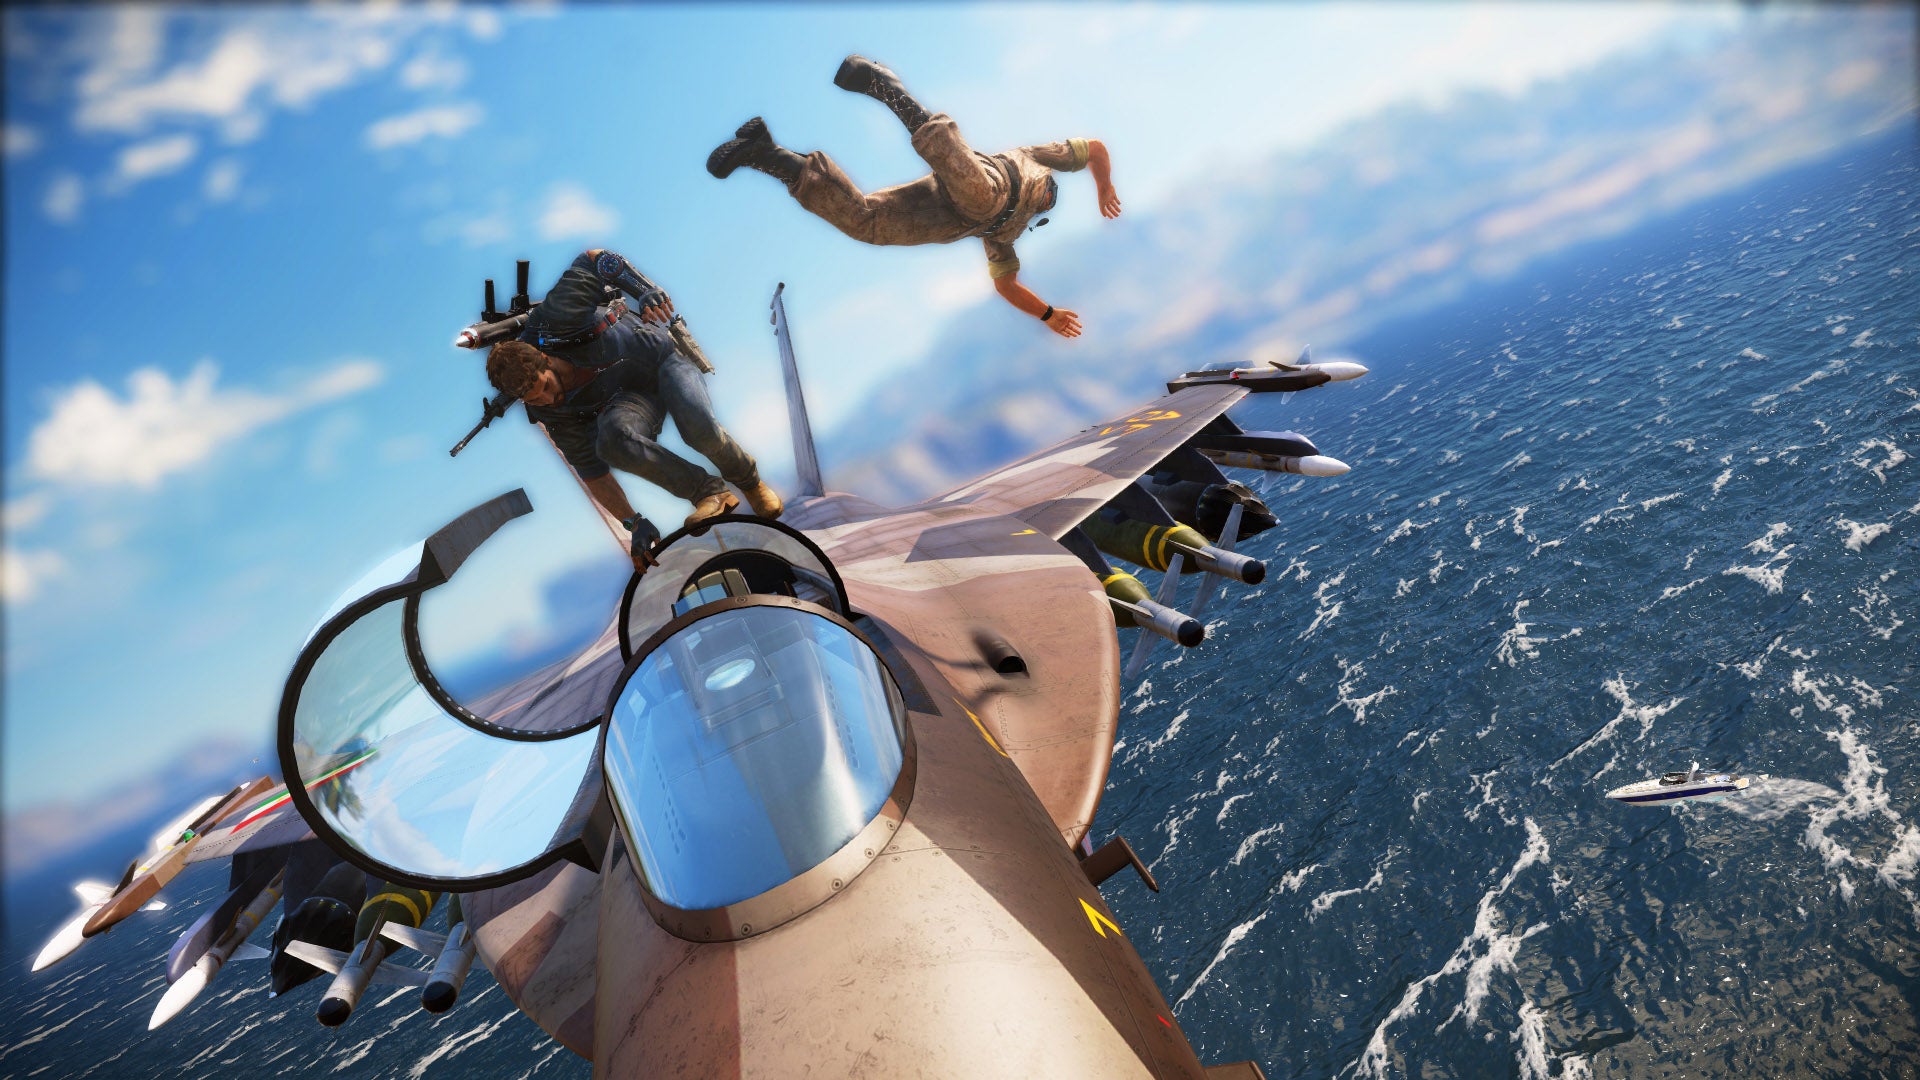 Image for Just Cause 3 has a cool Marvel Comics Easter egg